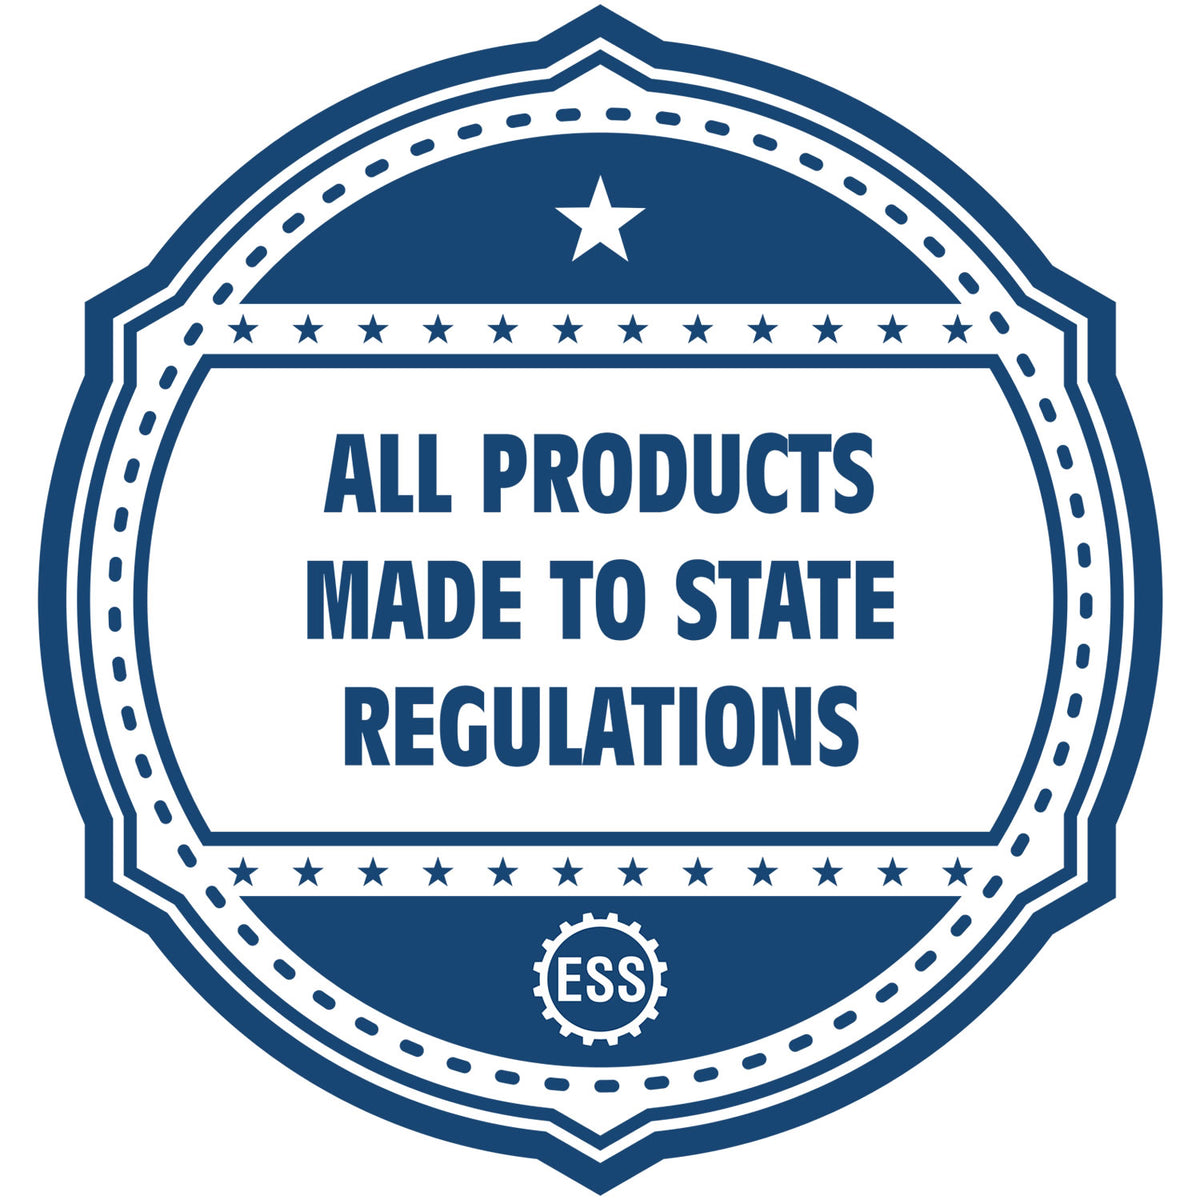 An icon or badge element for the Wooden Handle Delaware State Seal Notary Public Stamp showing that this product is made in compliance with state regulations.